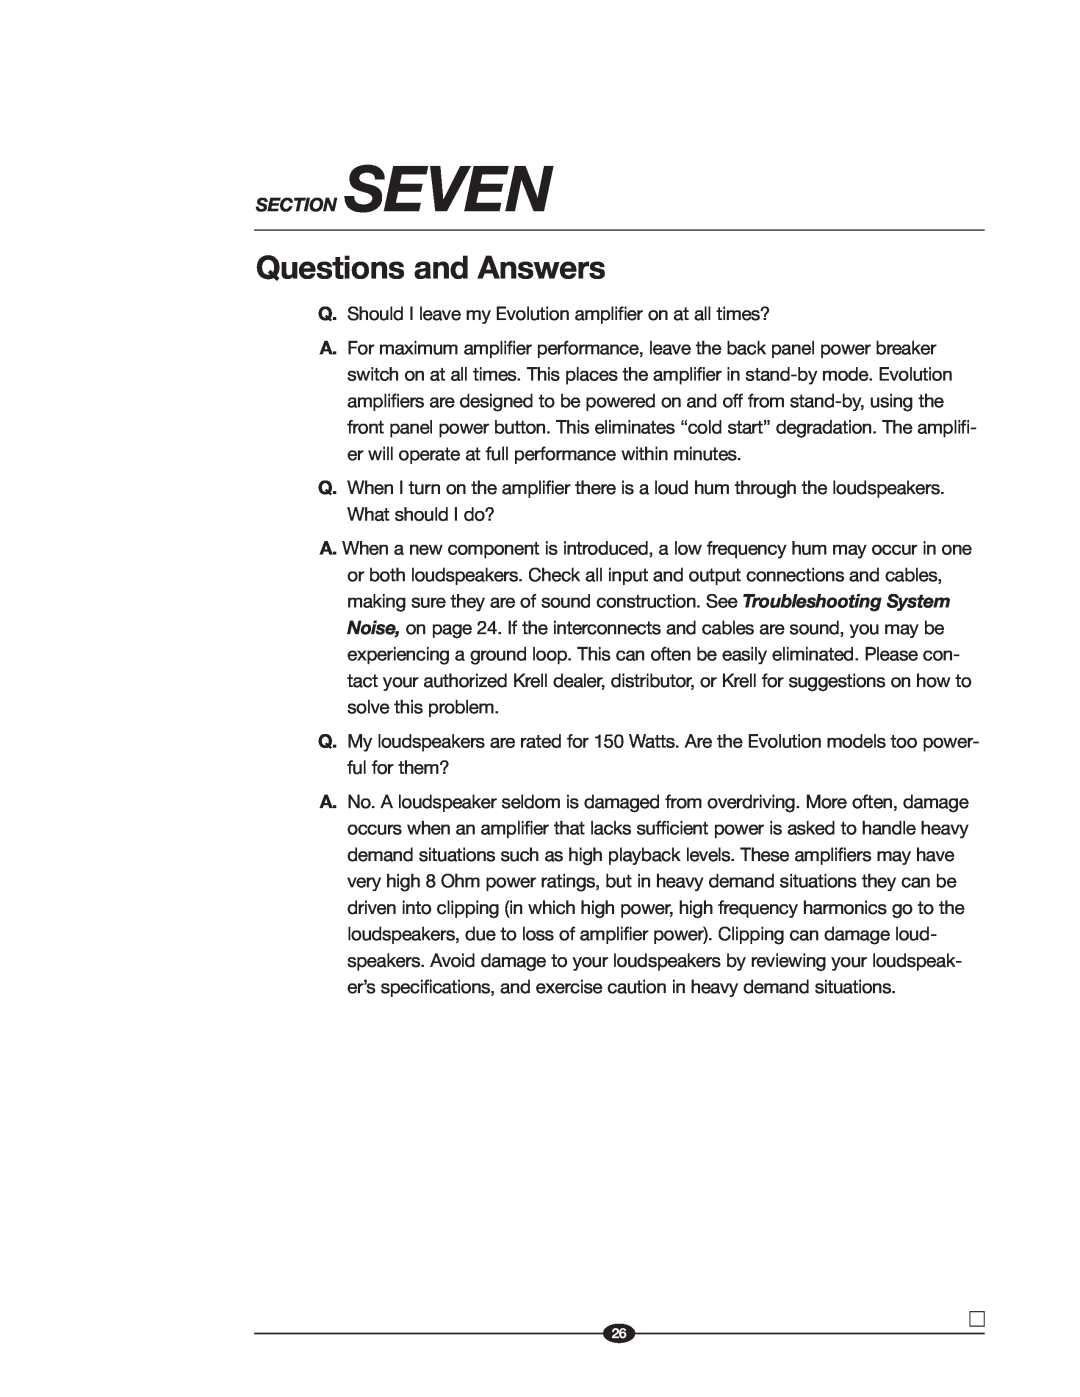 Krell Industries Evolution manual Questions and Answers, Section Seven 